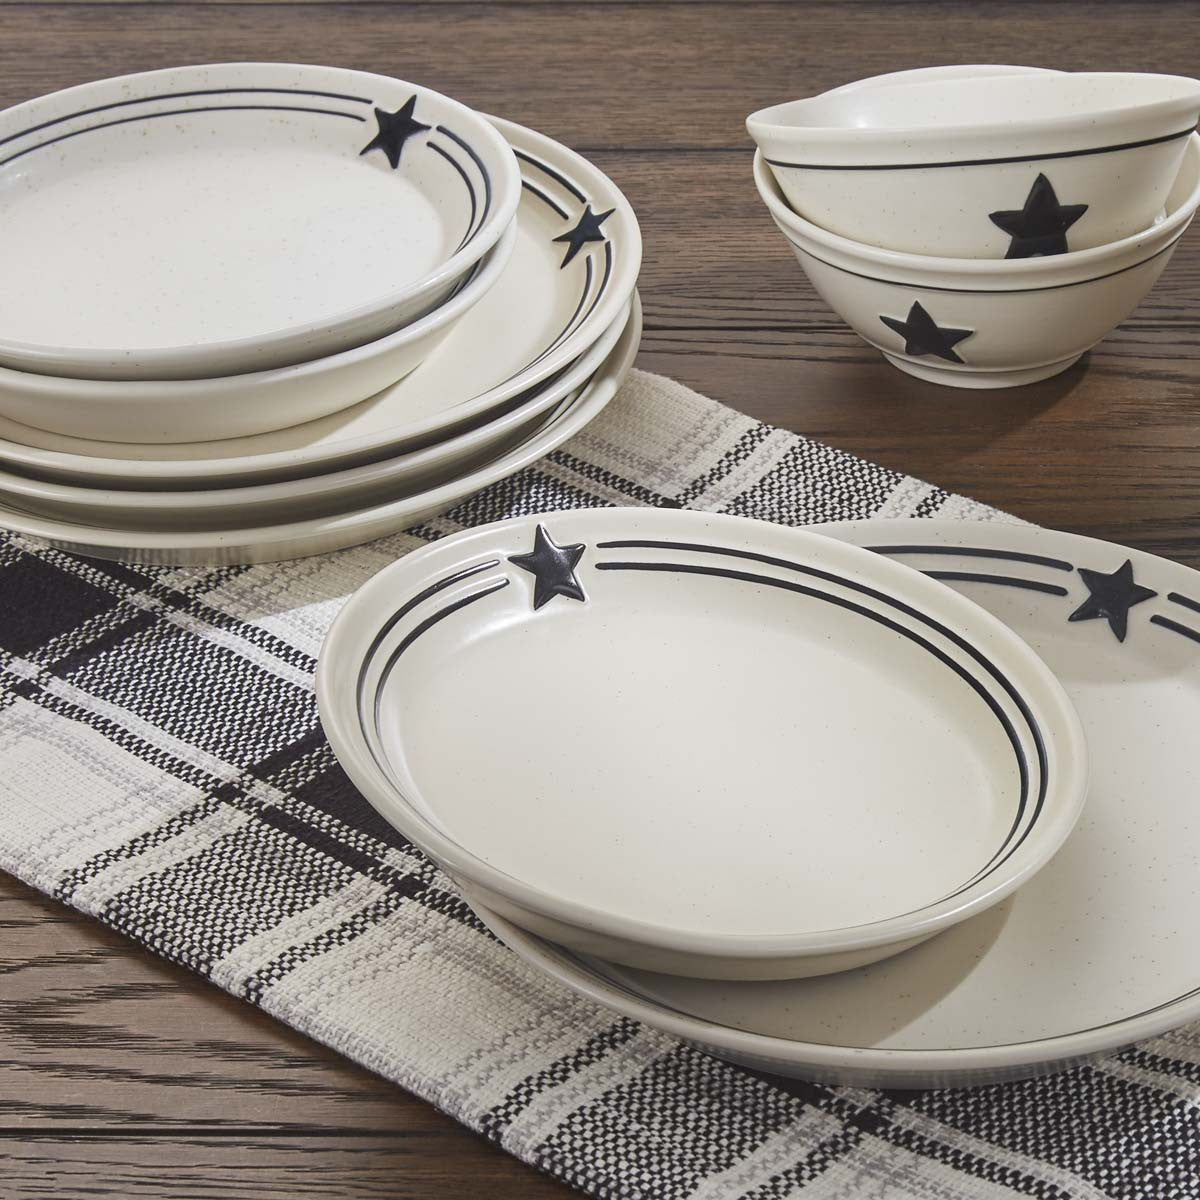 Country Star Salad Plates - Set of 8 Park Designs